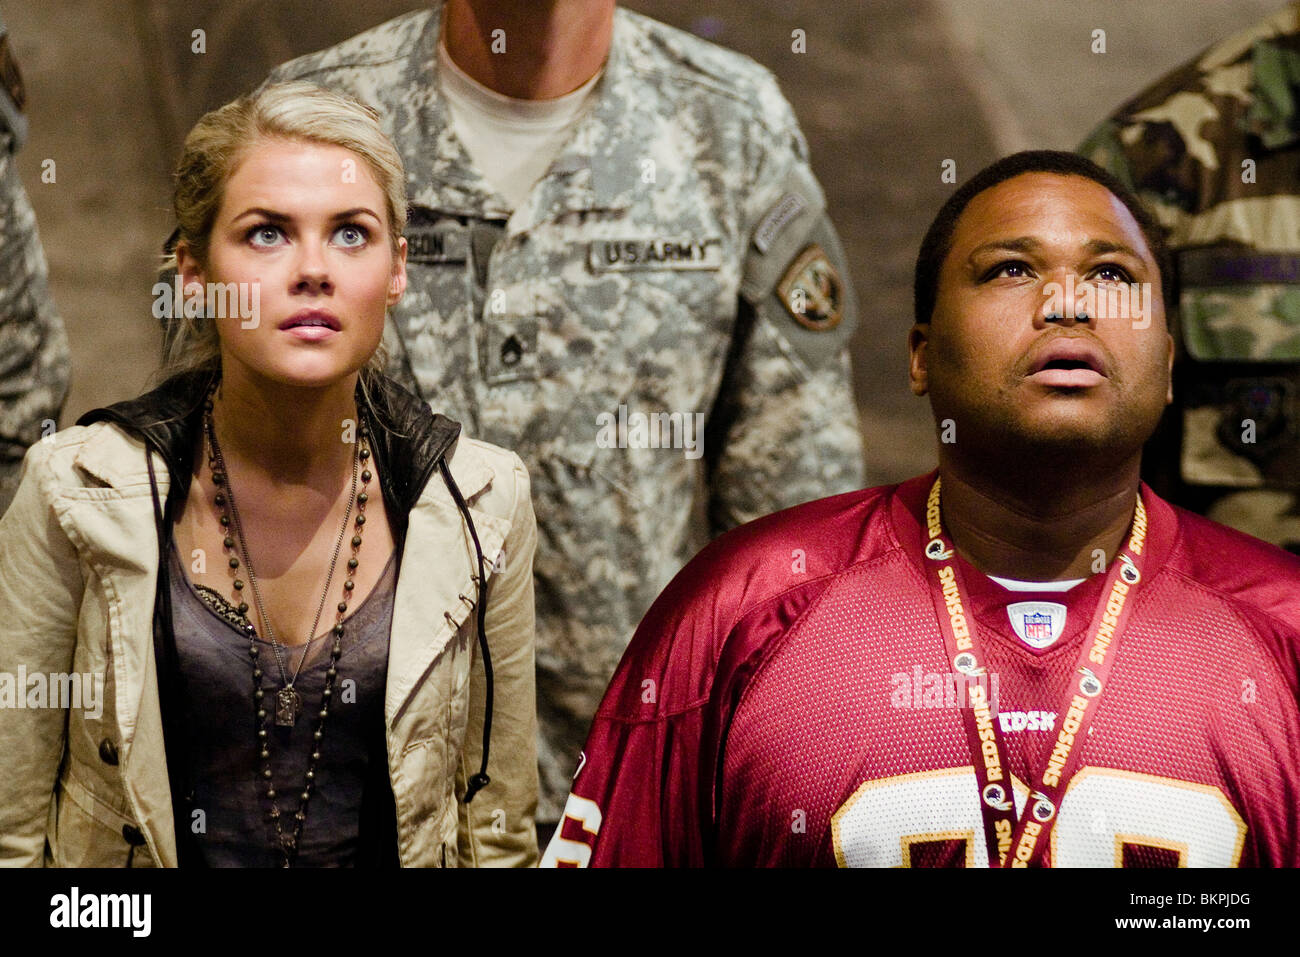 TRANSFORMERS (2007) RACHAEL TAYLOR, ANTHONY ANDERSON MICHAEL BAY (DIR) TRRS 001-10 MOVIESTORECOLLECTION LTD Stock Photo